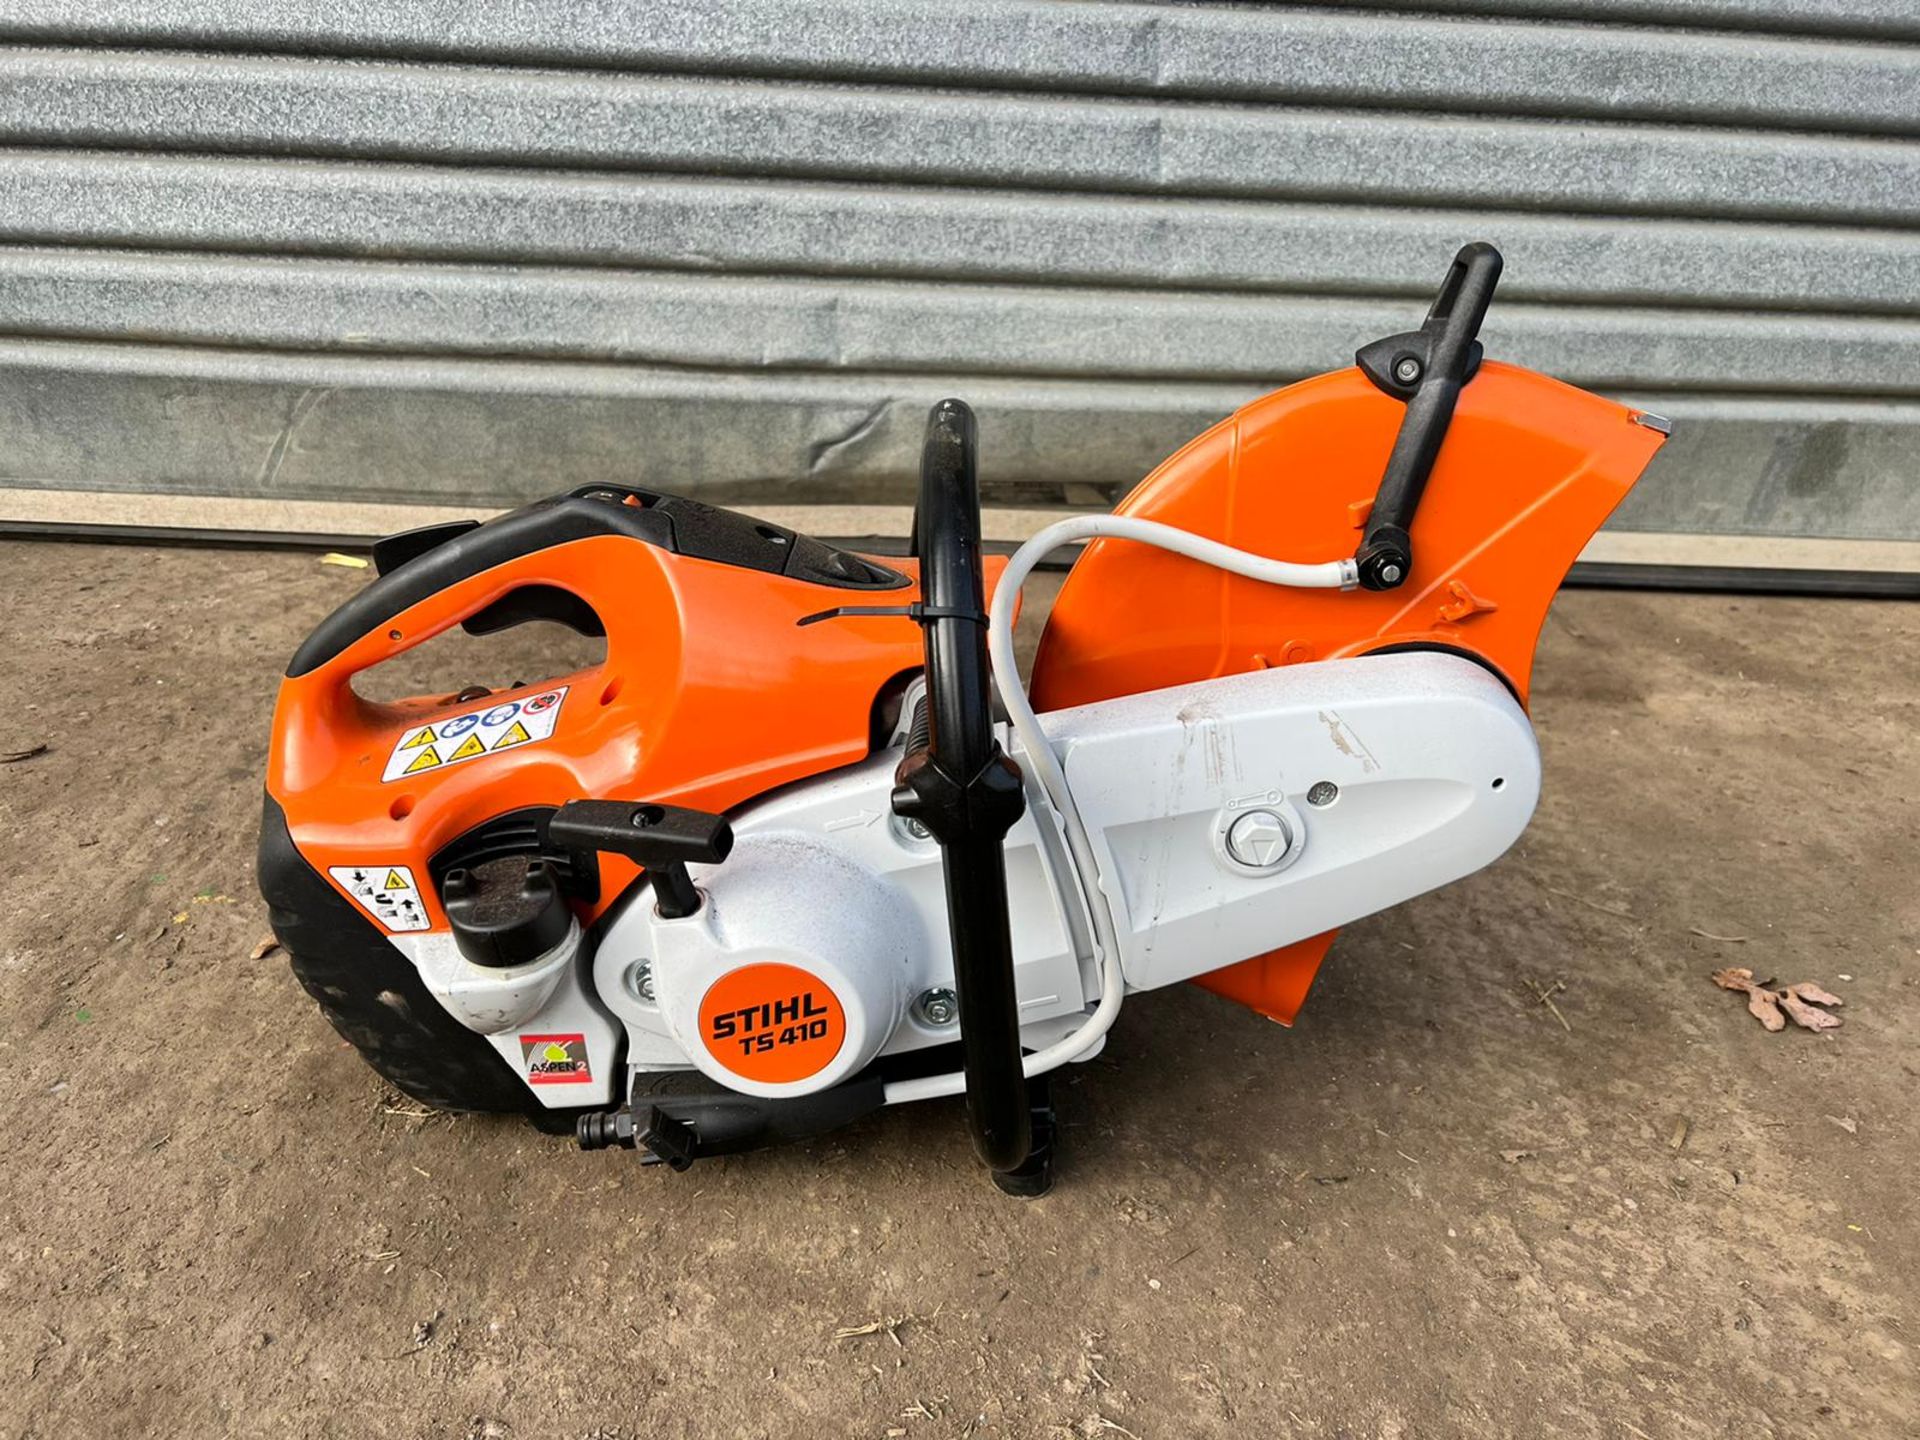 NEW AND UNUSED STIHL TS410 PETROL DISC CUTTER, MANUFACTURED 11/2021, C/W NEW 12" DIAMOND BLADE